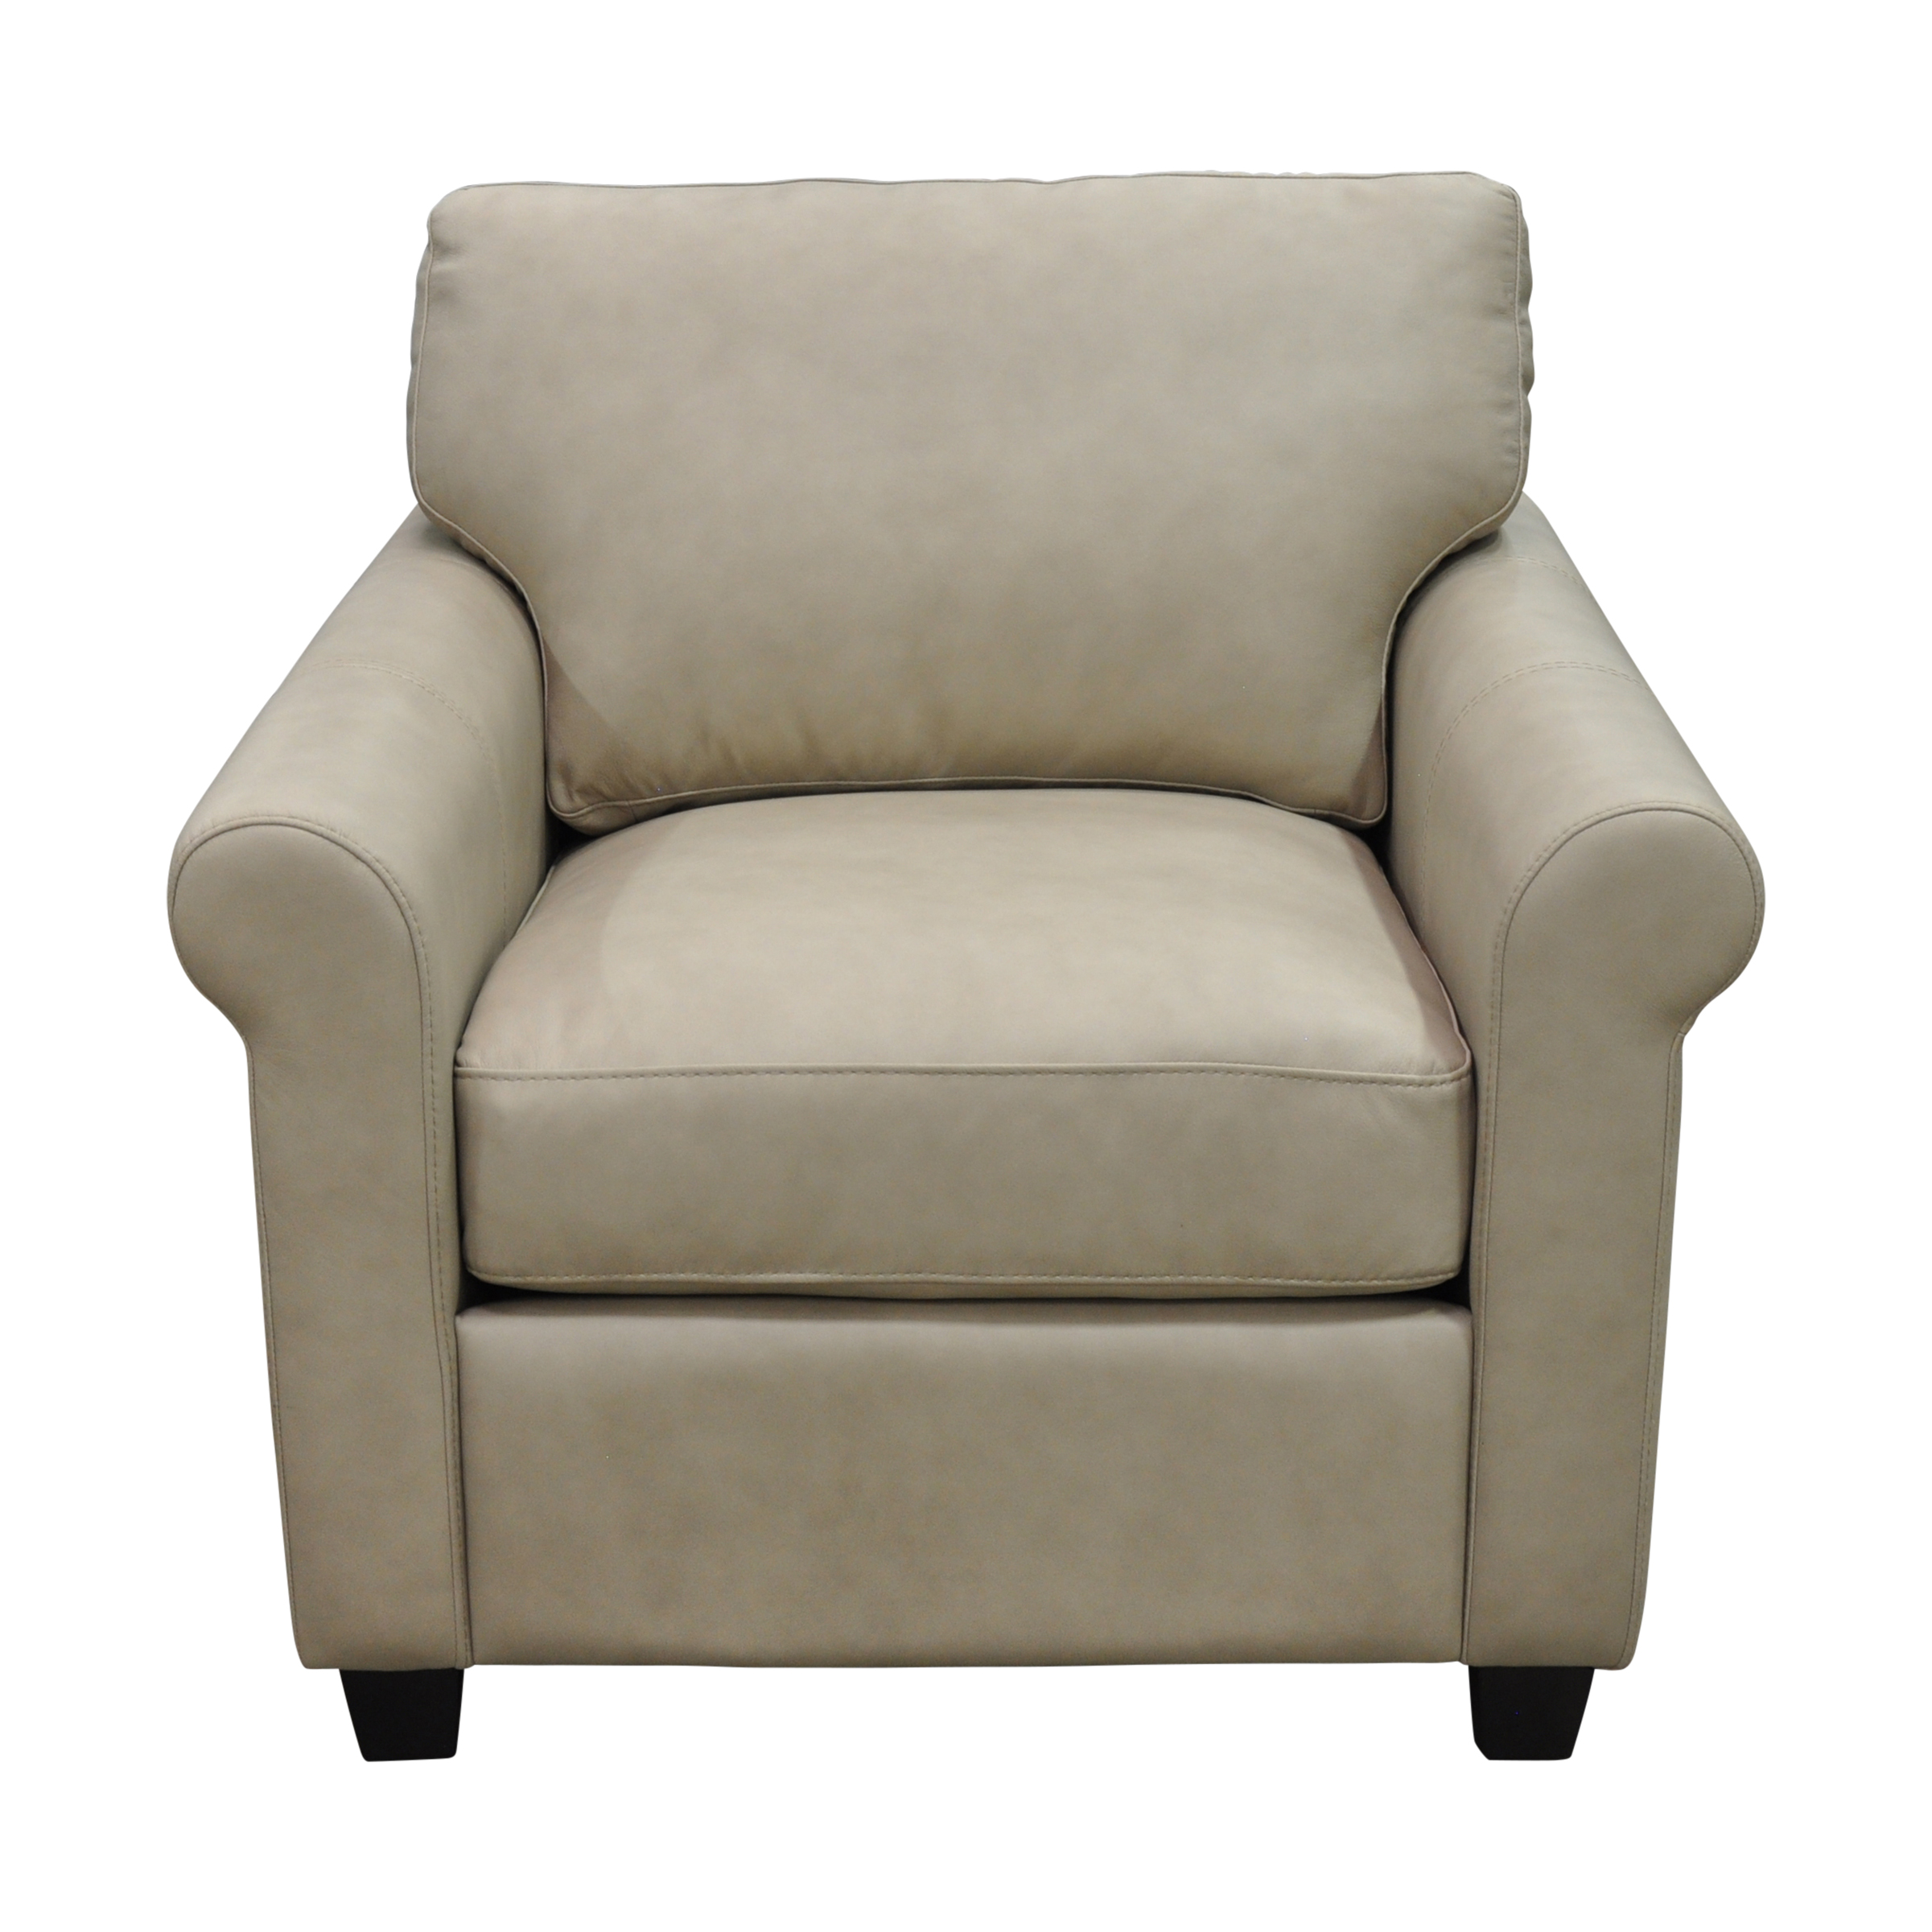 Stationary Solutions 201 Accent Chair